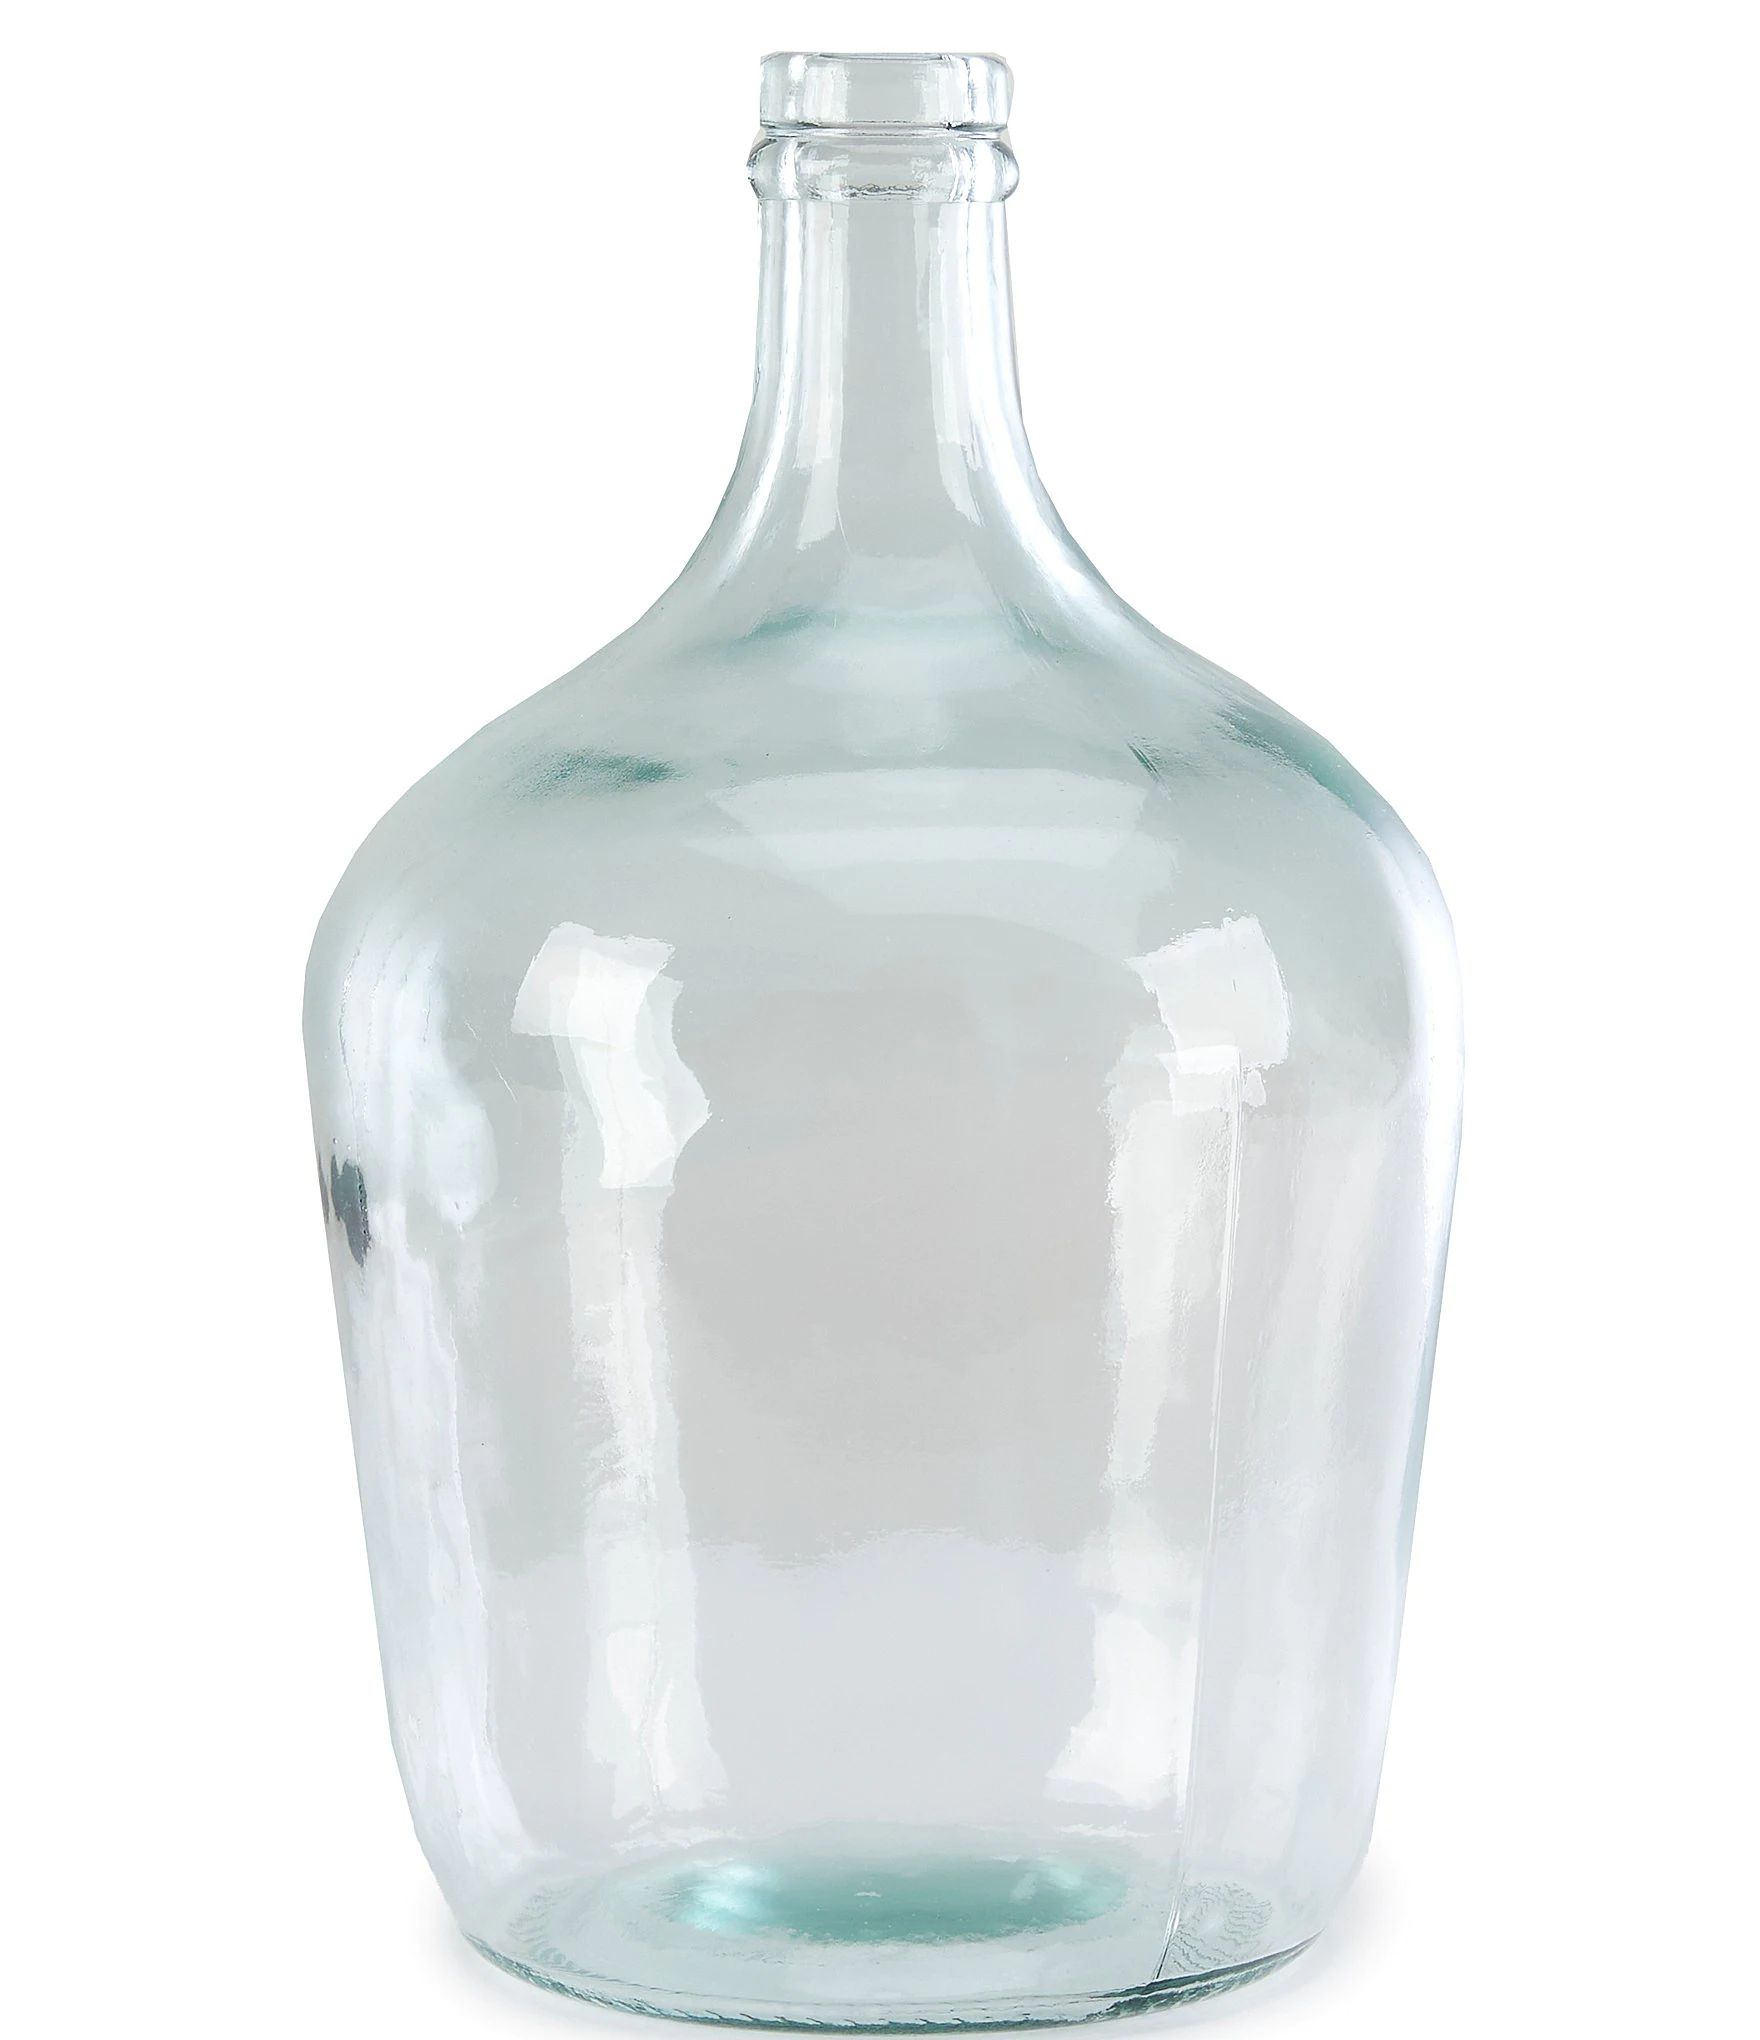 Simplicity Collection Recycled Glass Demijohn Vase | Dillard's